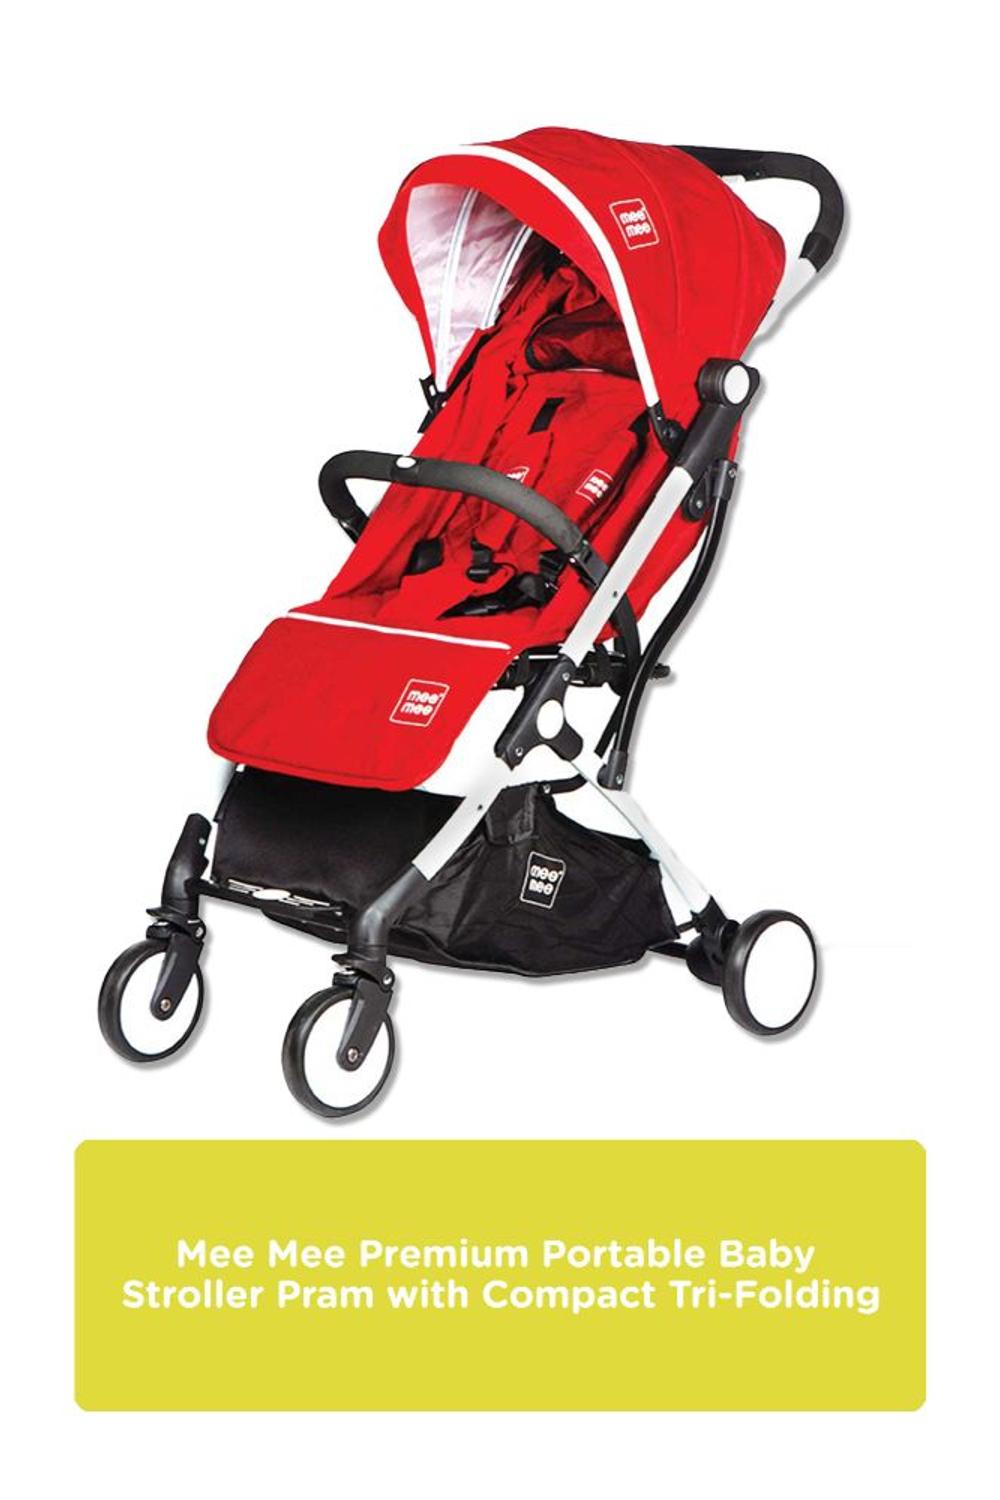 Mee Mee Premium Stylish Portable Baby Stroller Pram with Compact Tri-Fold | Travel-Friendly - Red